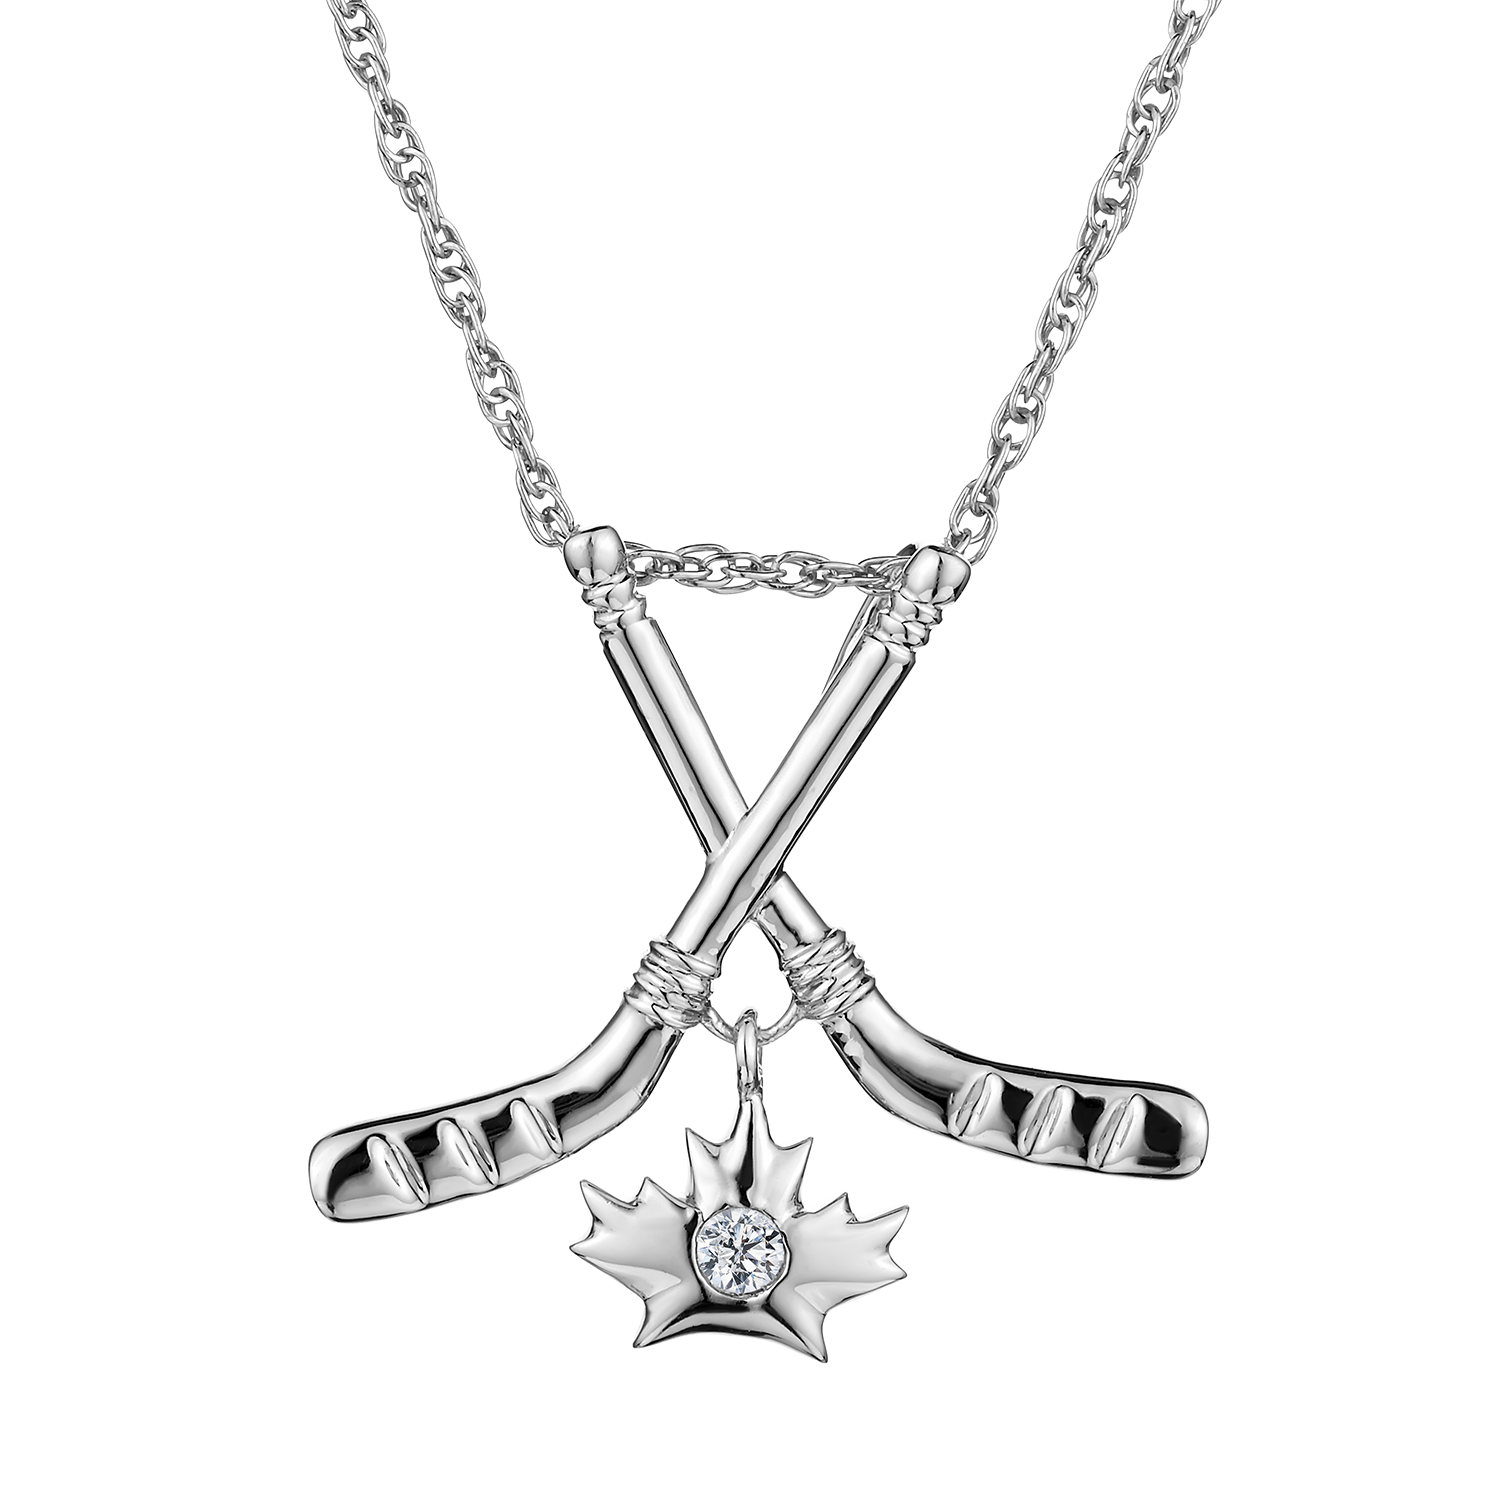 .03 Carat Diamond "Love Hockey" Pendant,  Sterling Silver. Necklaces and Pendants. Griffin Jewellery Designs